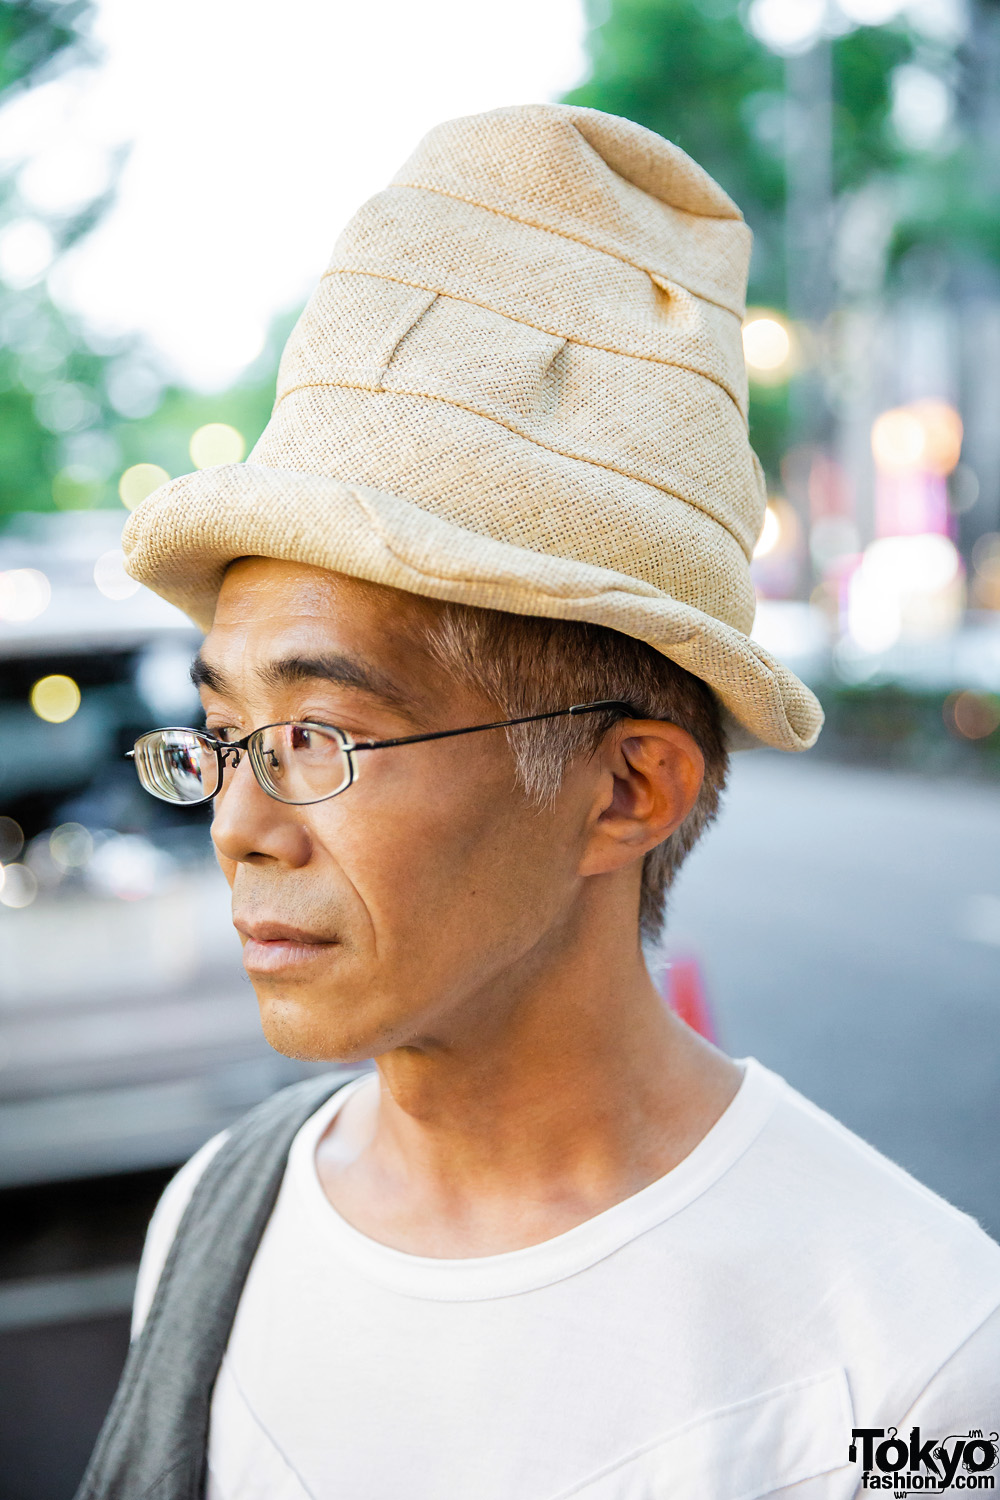 Comme des Garcons Harajuku Street Style w/ Tall Tan Hat, White